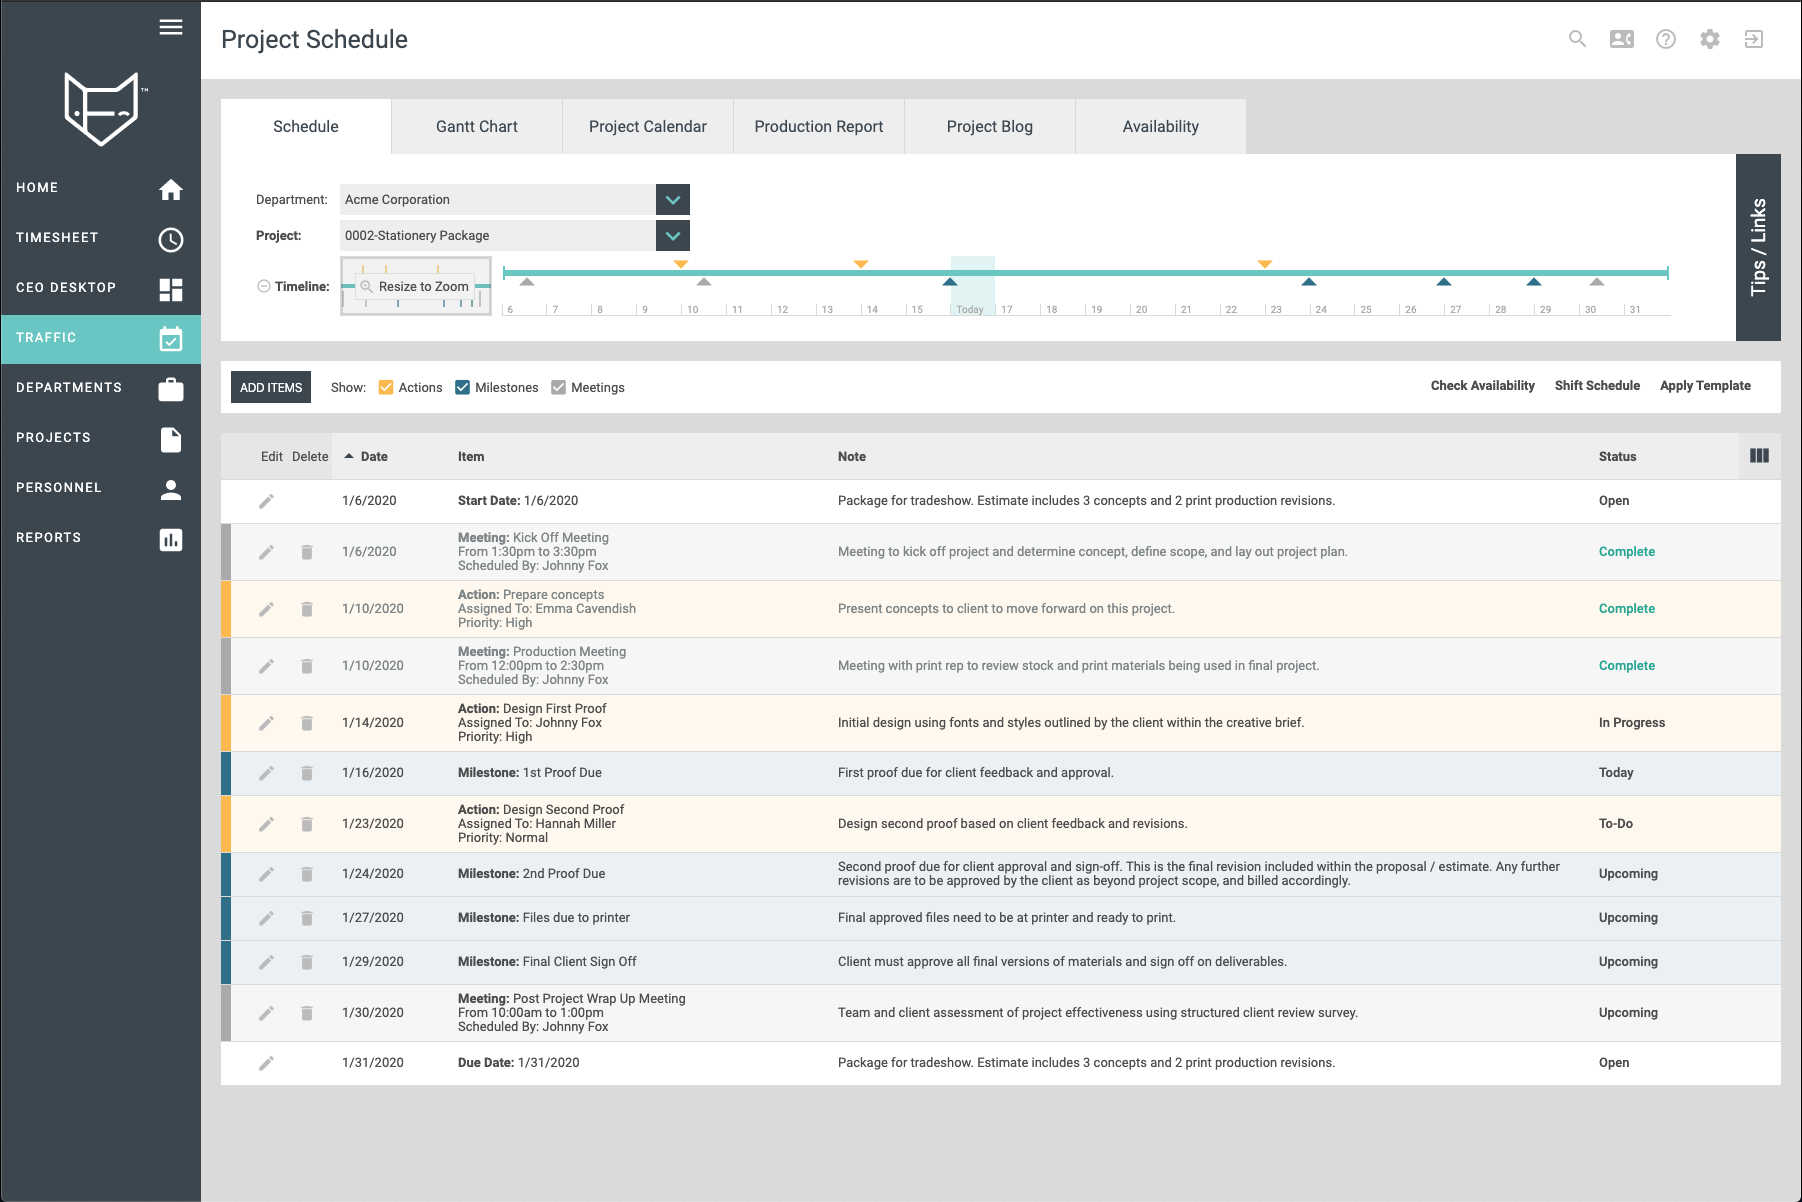 Building out Project Schedules is a breeze with FunctionFox’s project scheduling feature. Add Milestones, Actions, and Project Meetings to account for everything that needs to happen between the start and due dates of your Project.